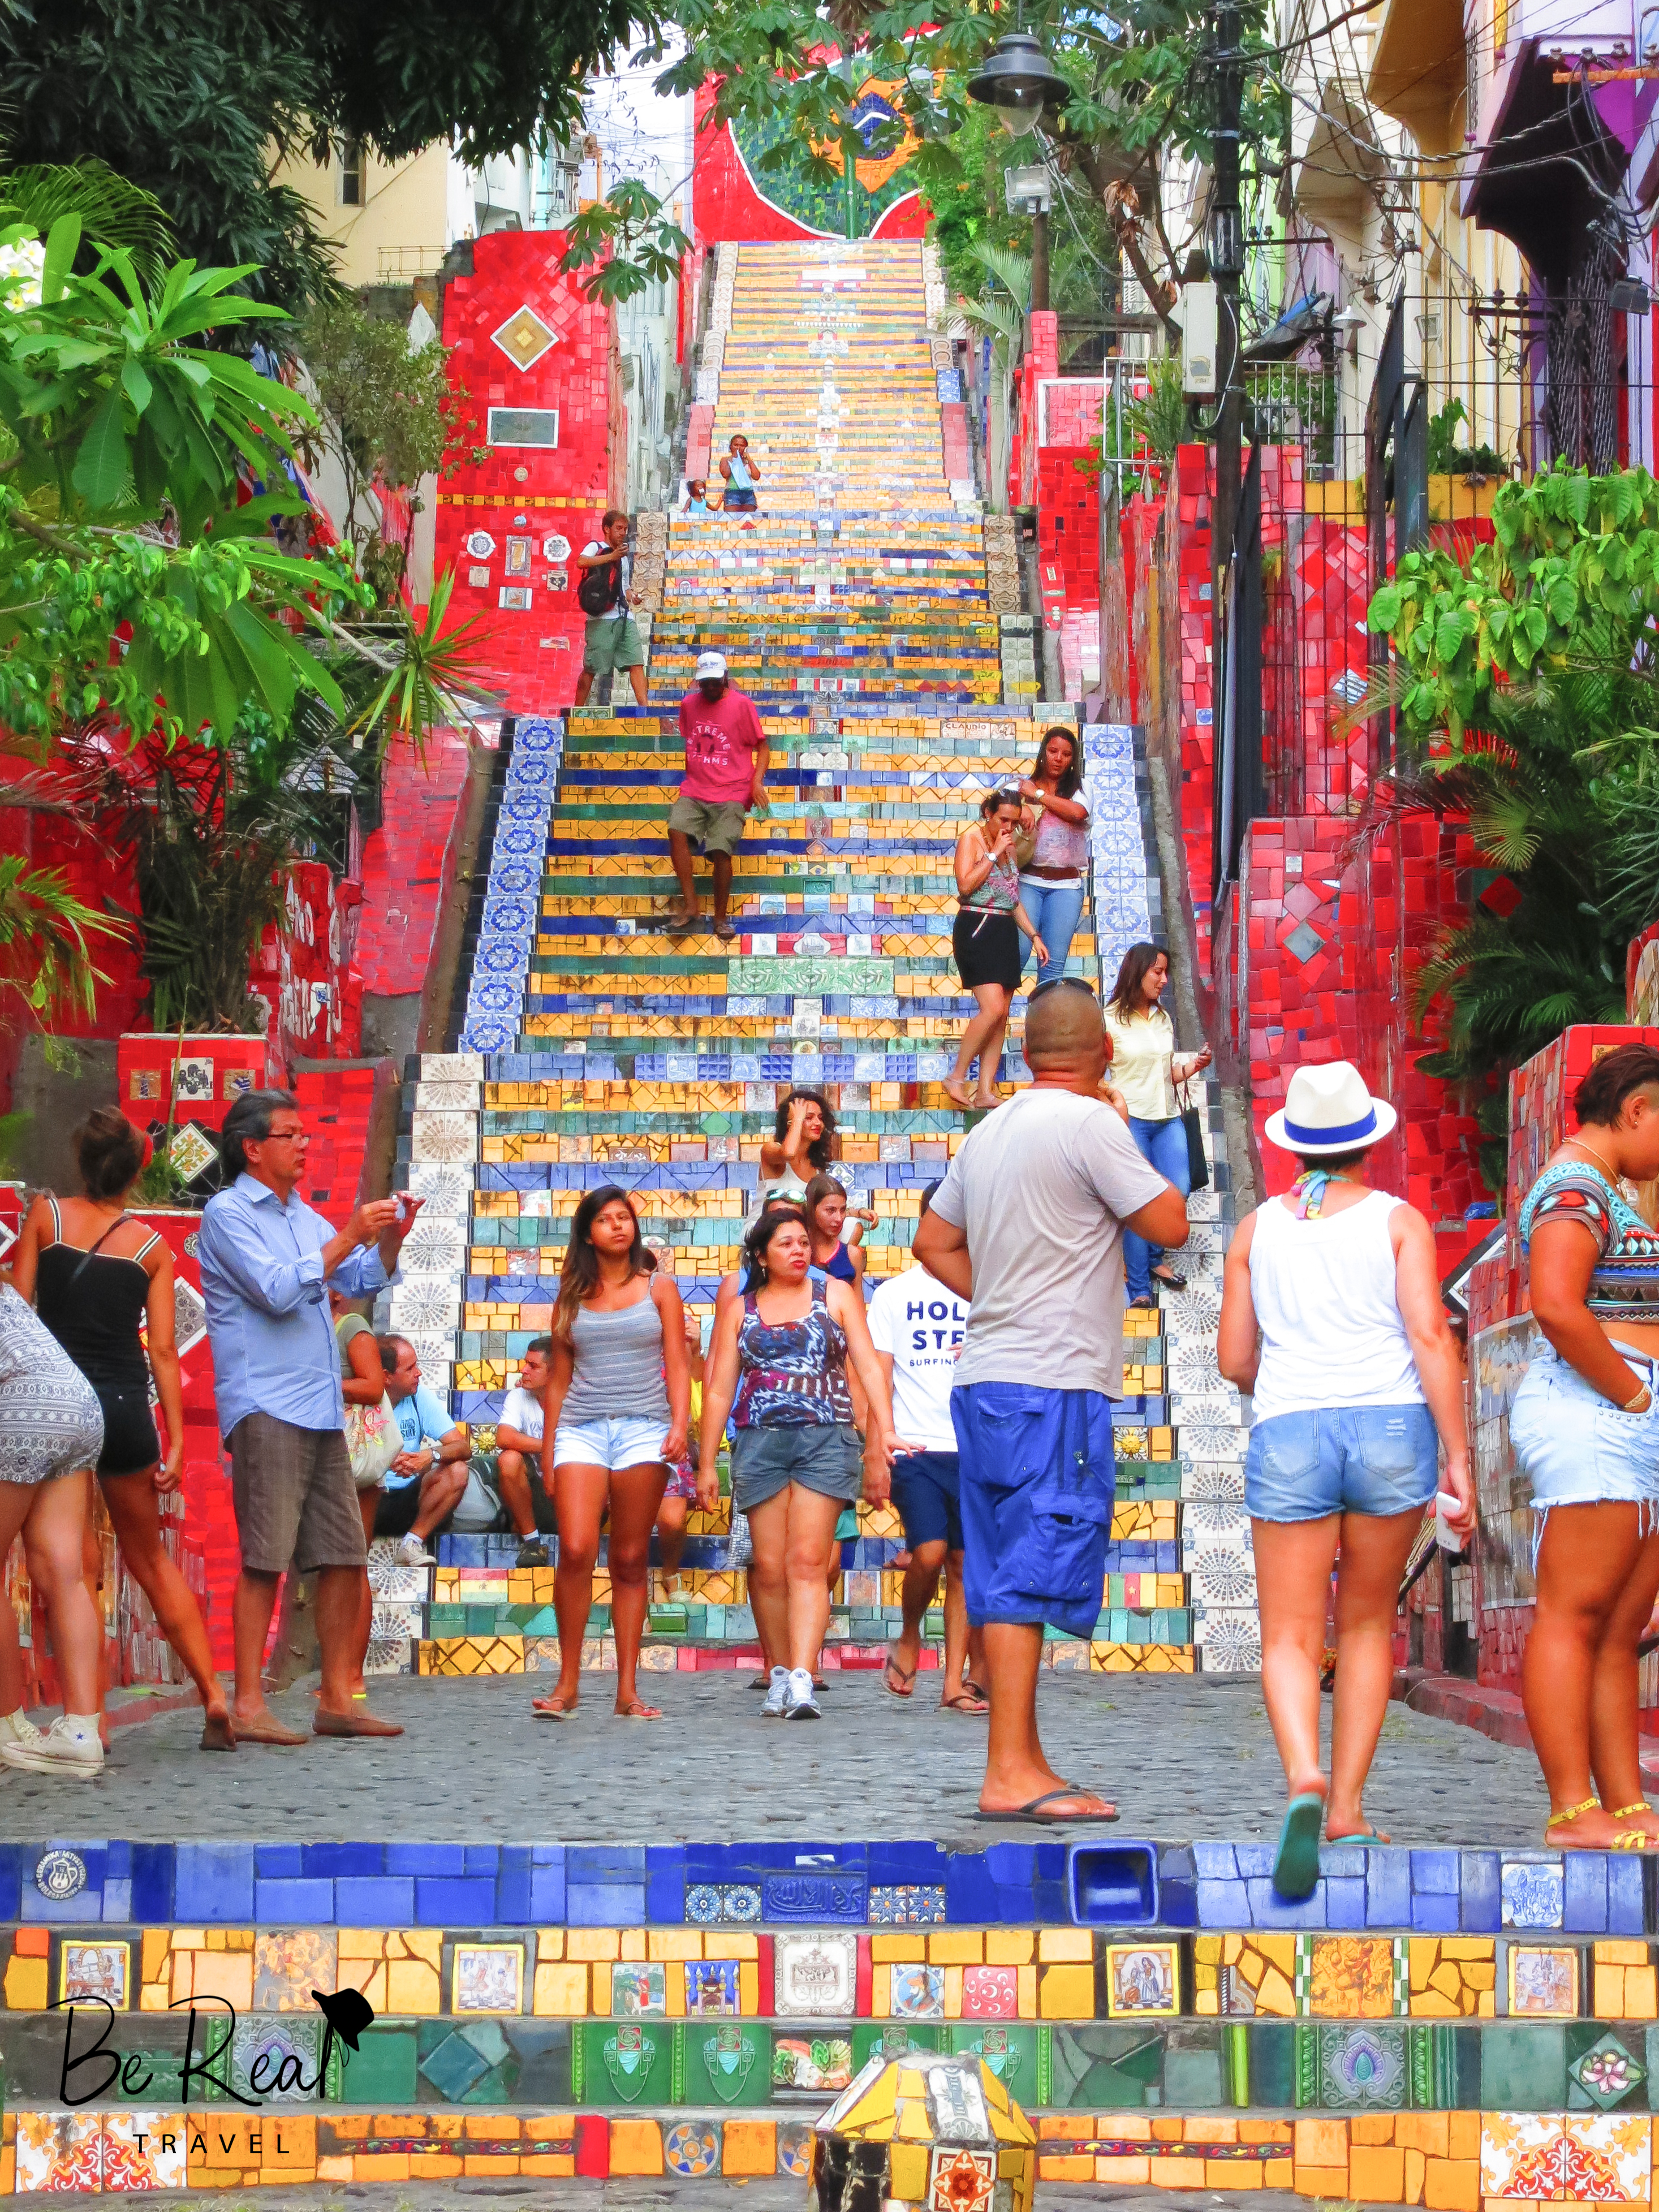 The Escadaria Selaron is one of many reasons why Rio de Janeiro is not overrated